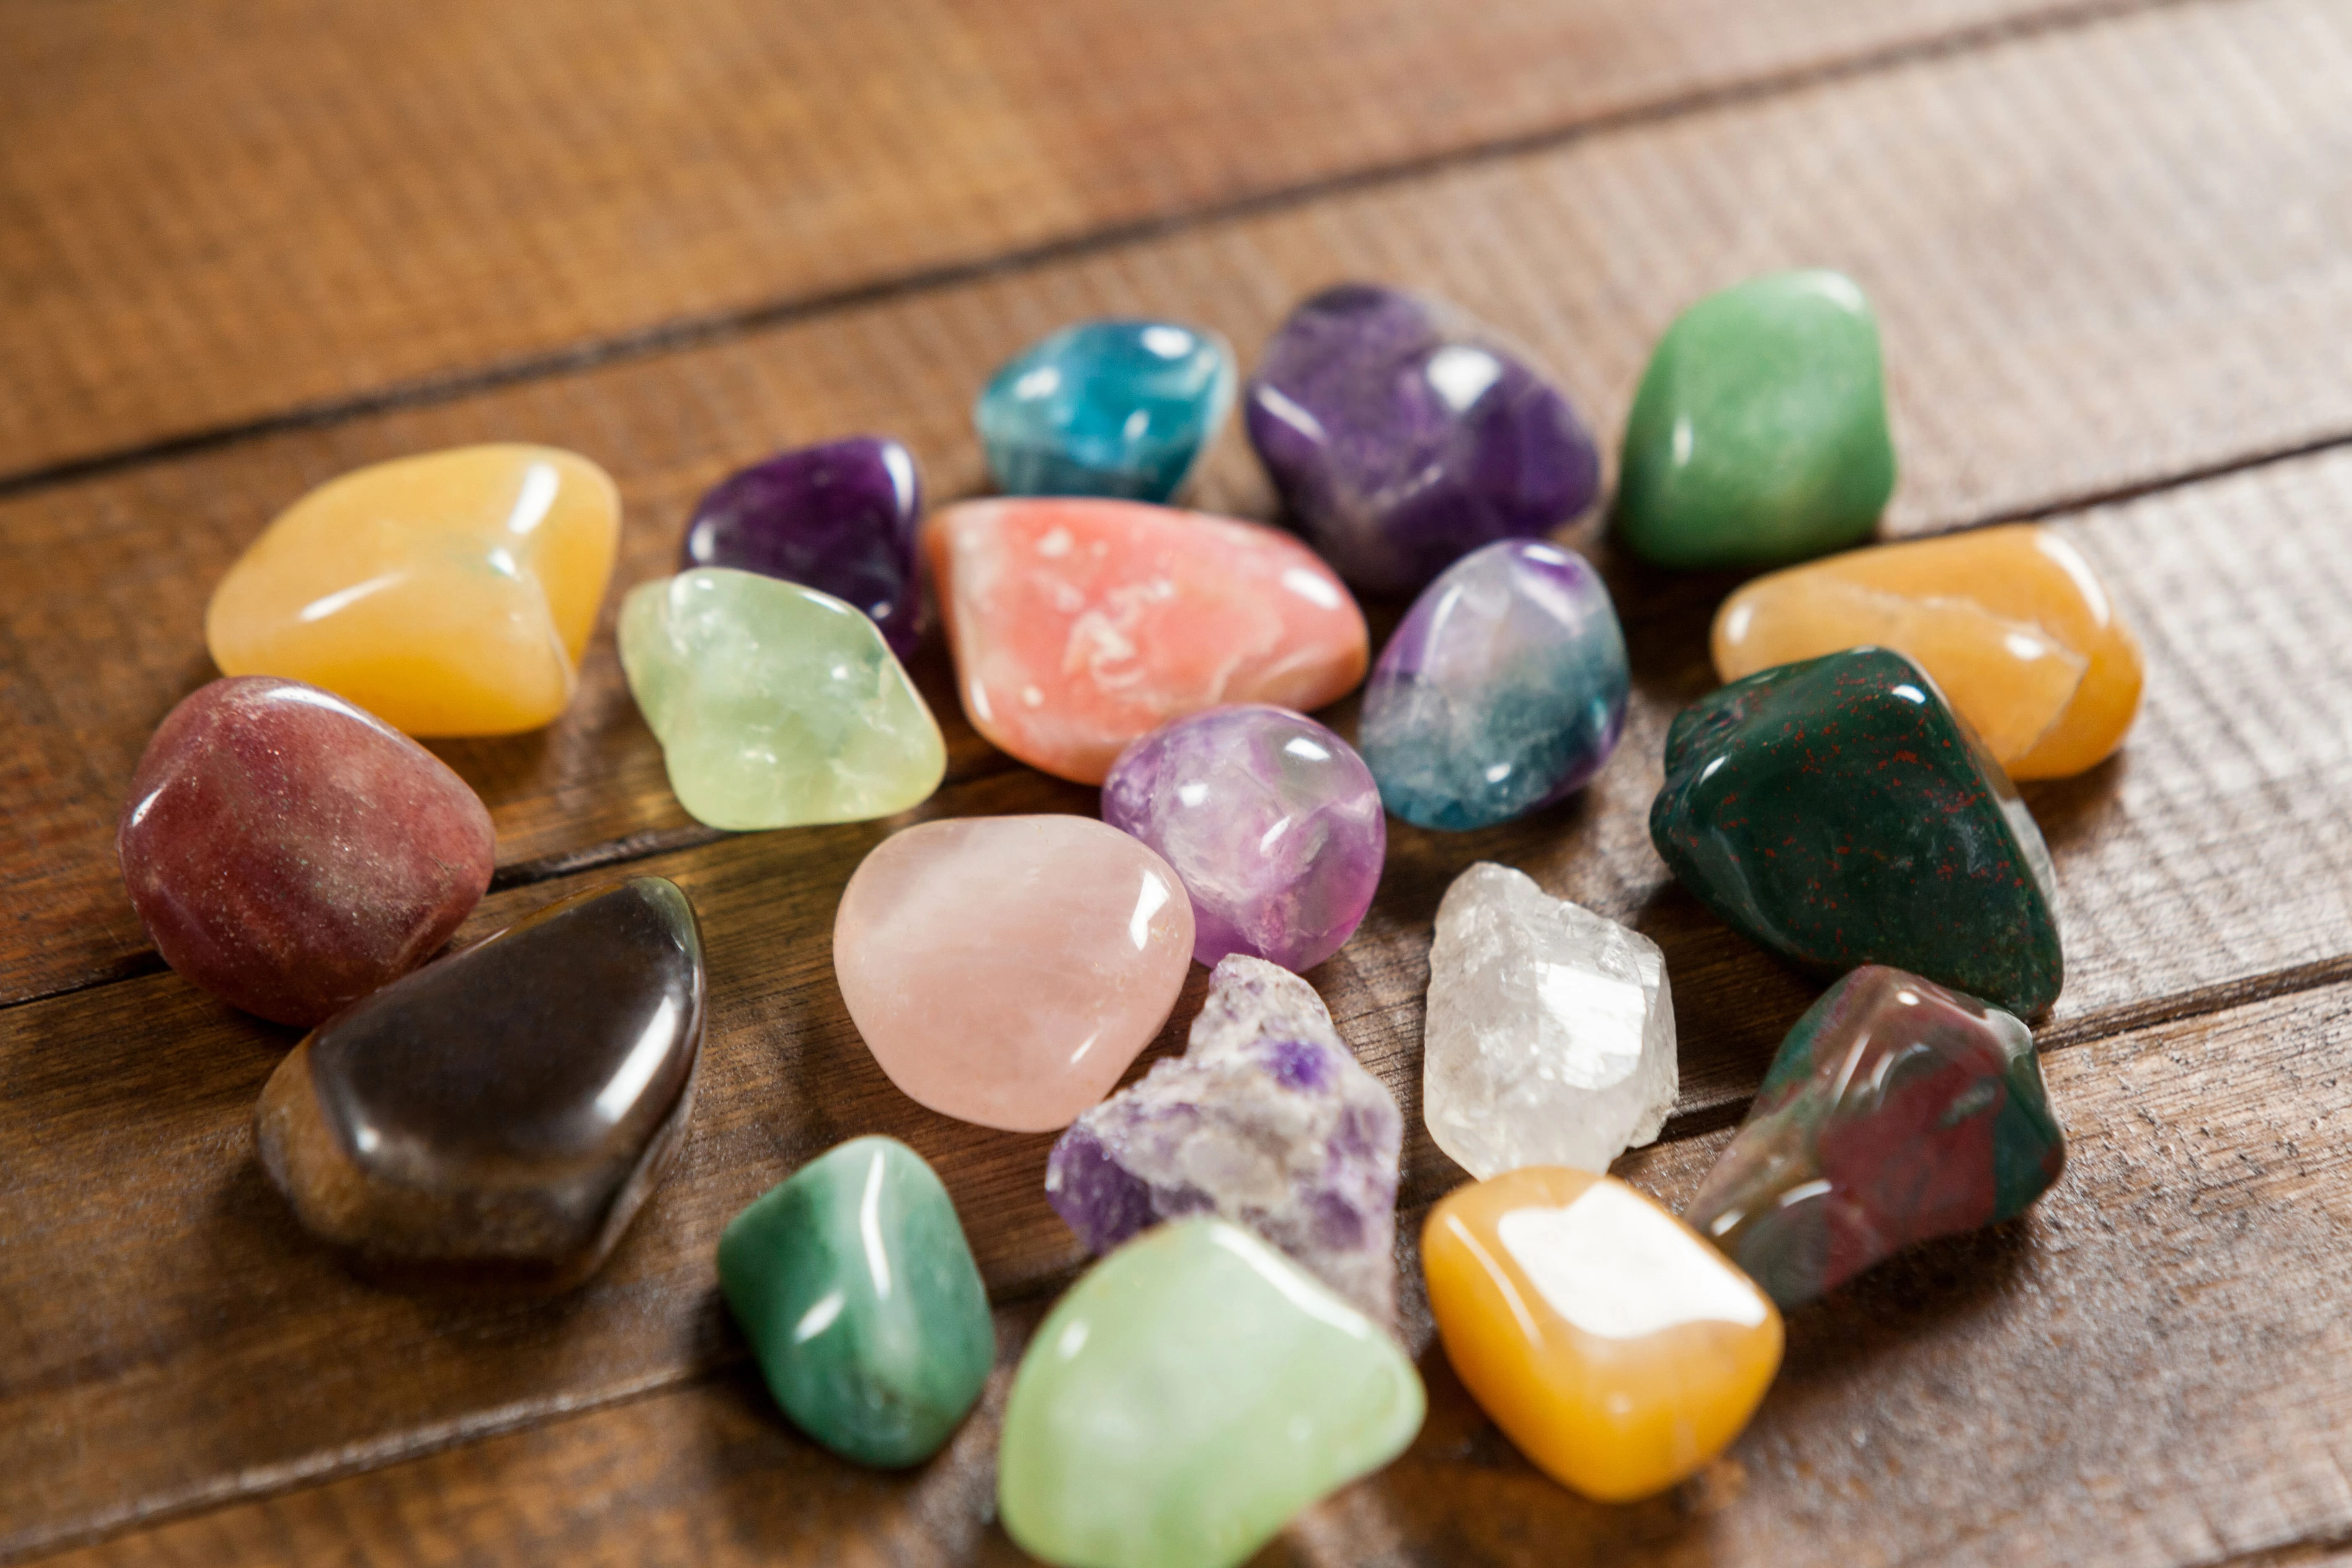 Several different types of natural stones in different colours that affect our mental and health state